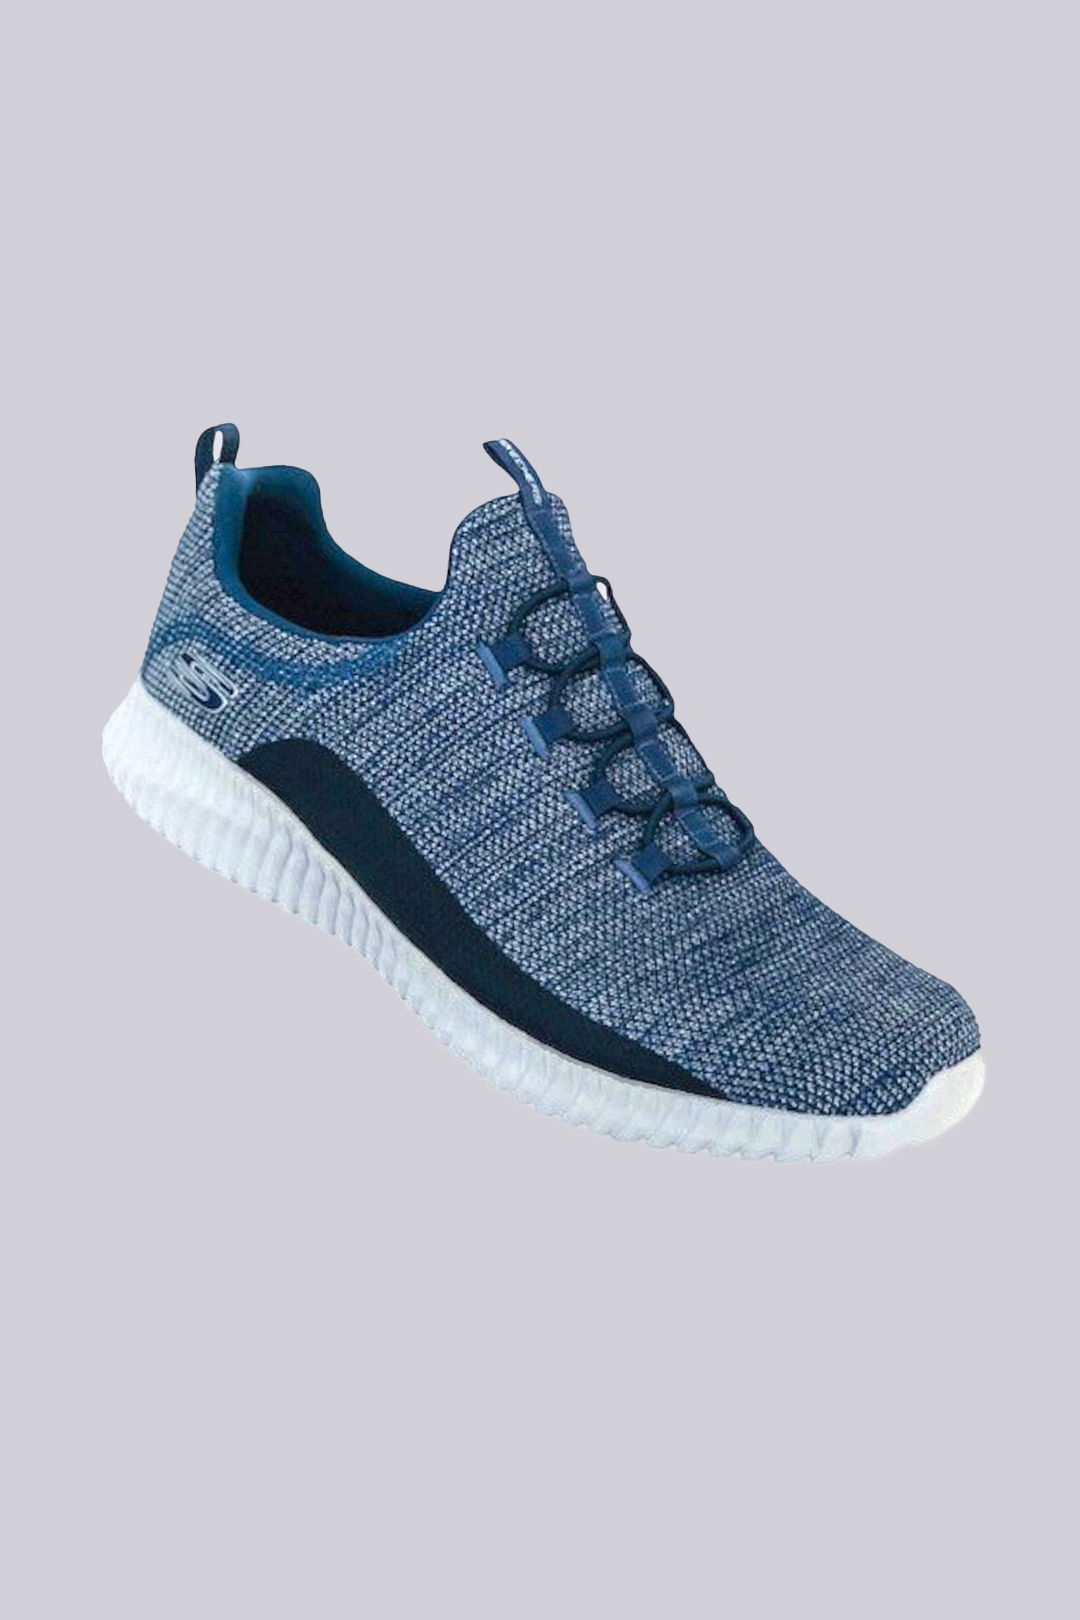 skechers air cooled shoes